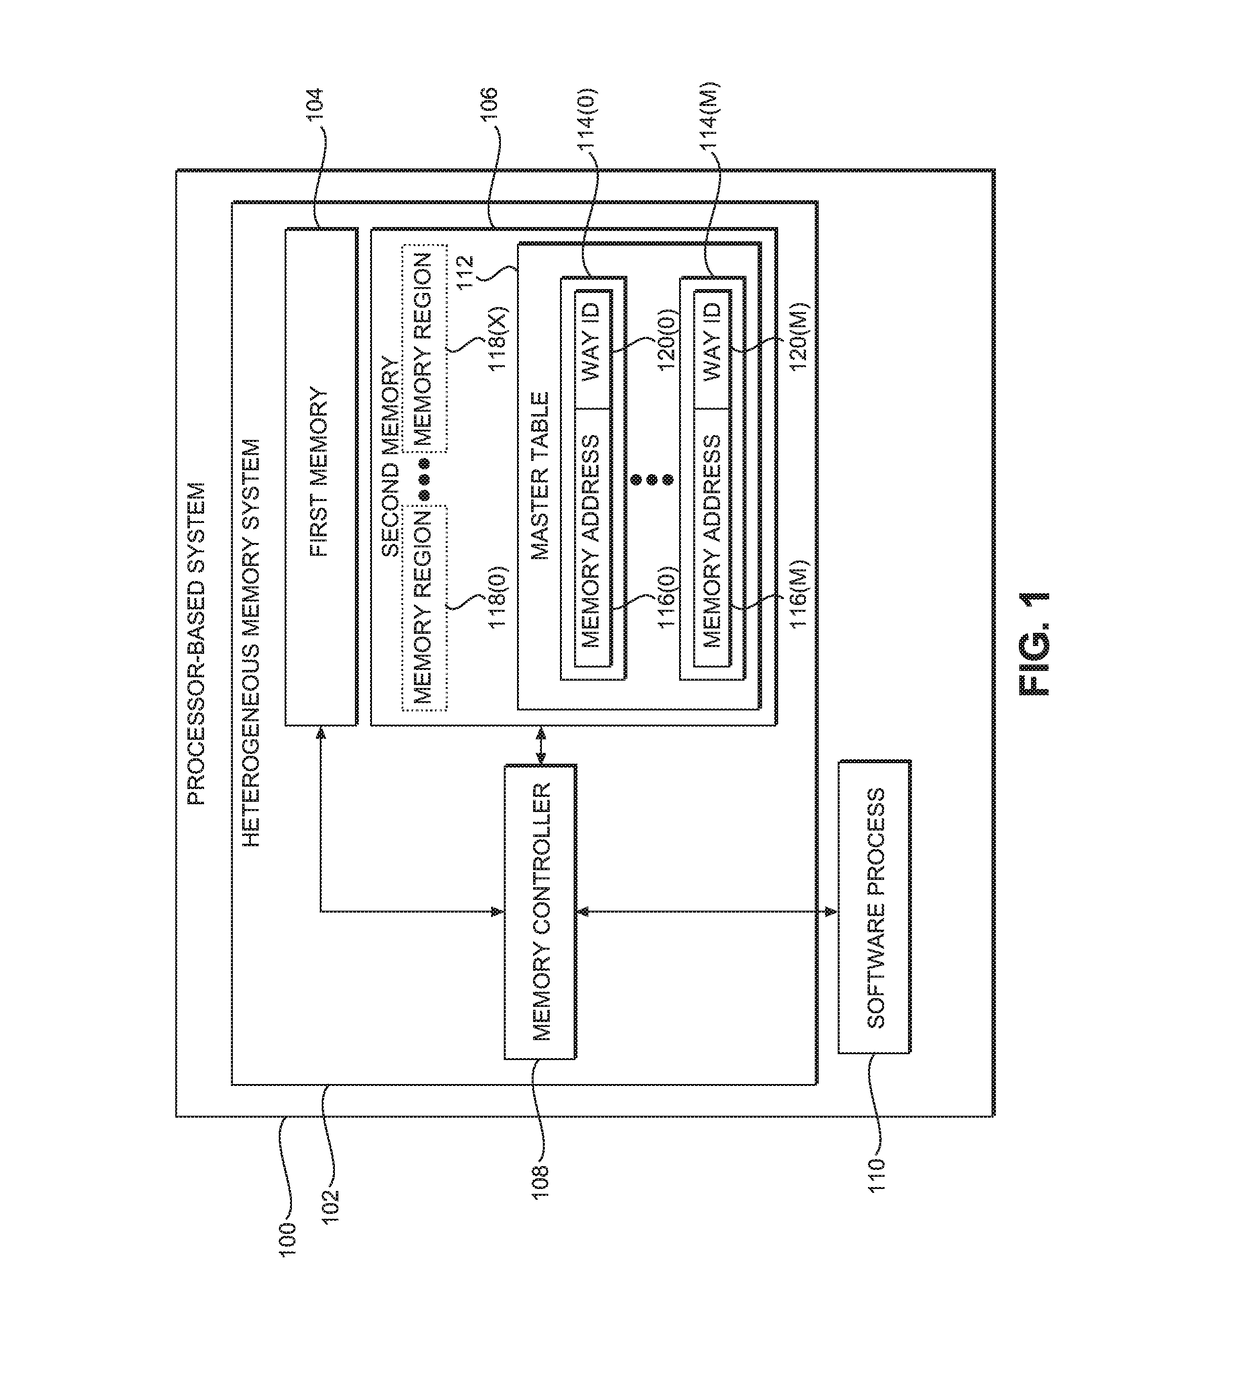 PROVIDING FLEXIBLE MANAGEMENT  OF HETEROGENEOUS MEMORY SYSTEMS USING SPATIAL QUALITY OF SERVICE (QoS) TAGGING IN PROCESSOR-BASED SYSTEMS